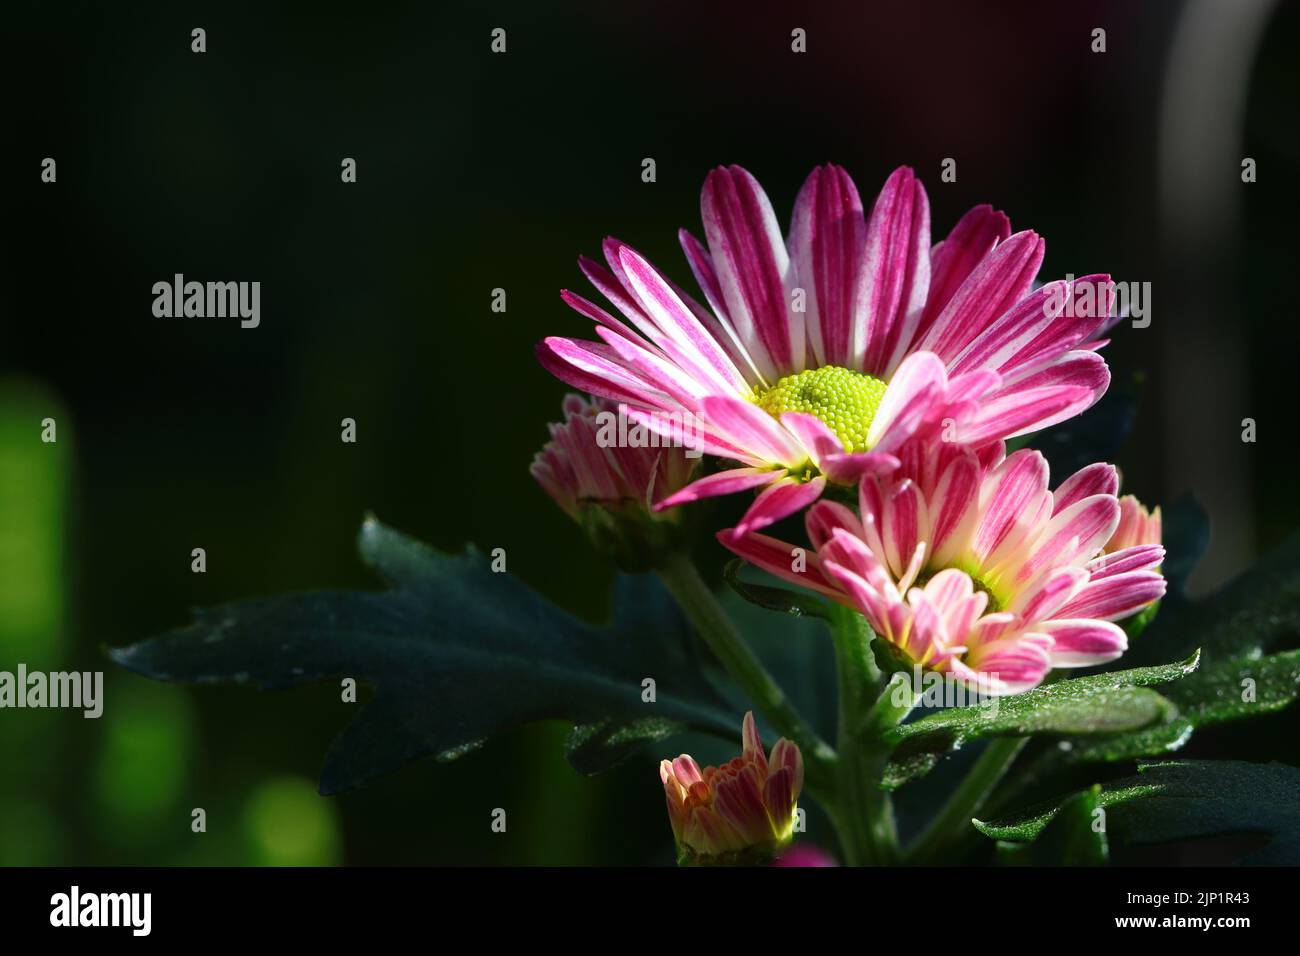 close-up of sunlit pink-white chrysanthemum flowers against a dark background, side view, copy space Stock Photo